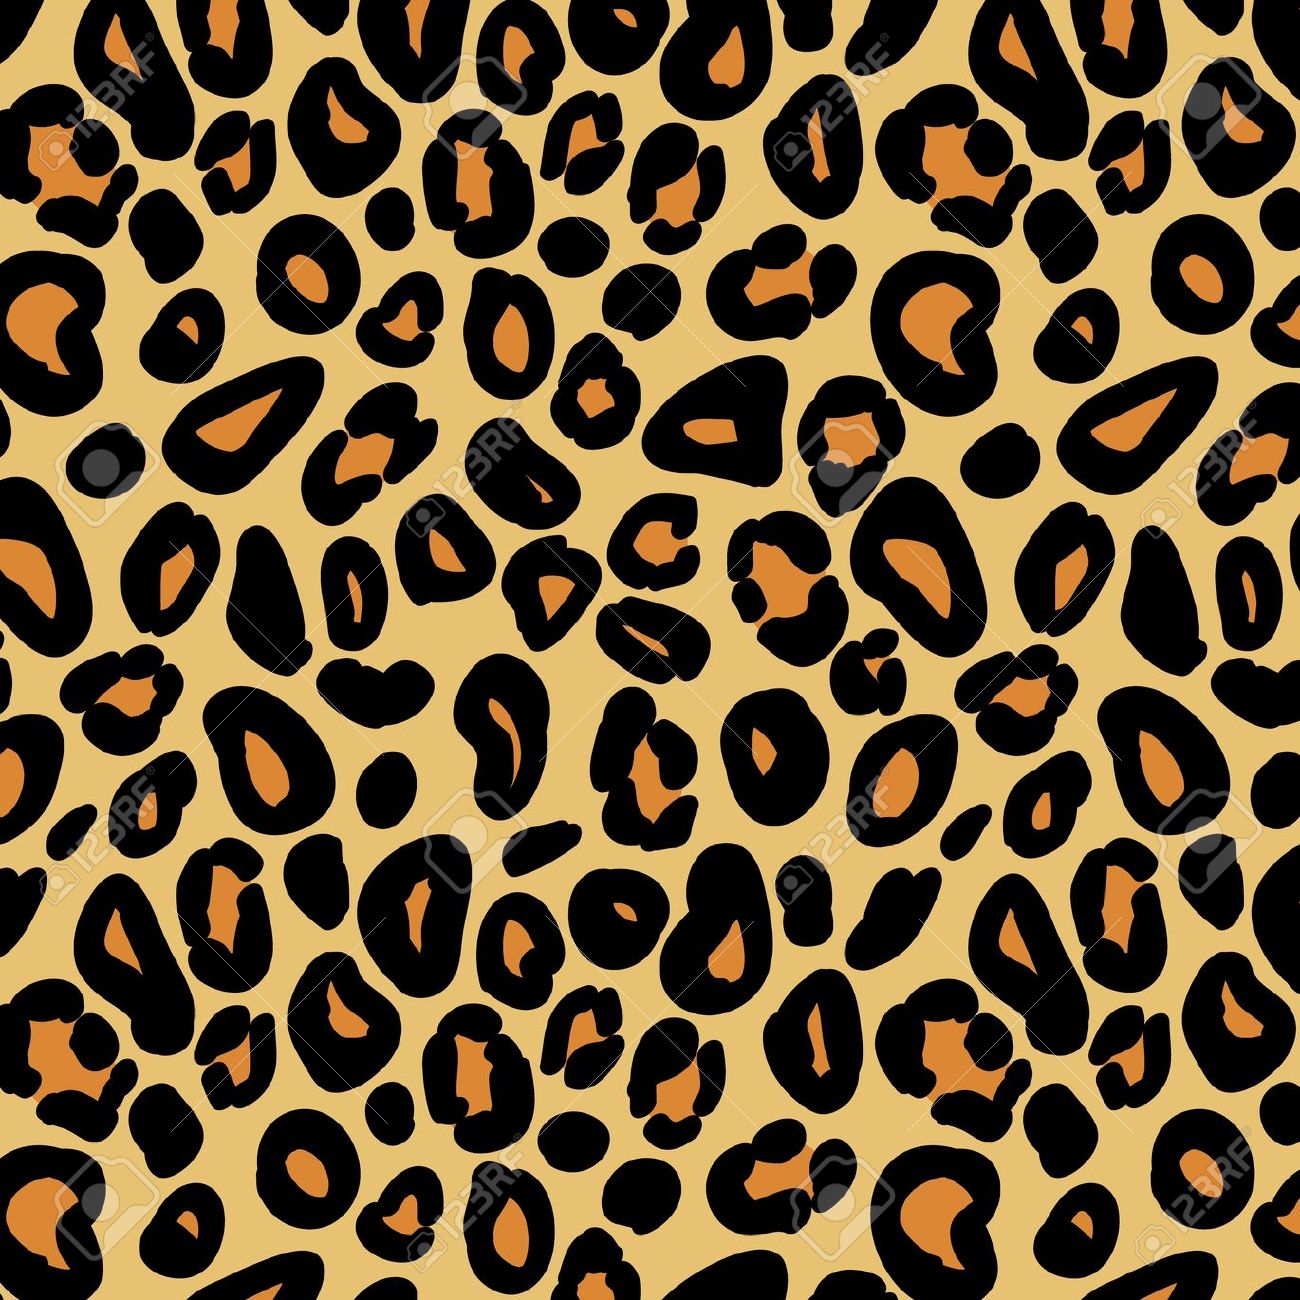 Cheetah print clipart clipart images gallery for free